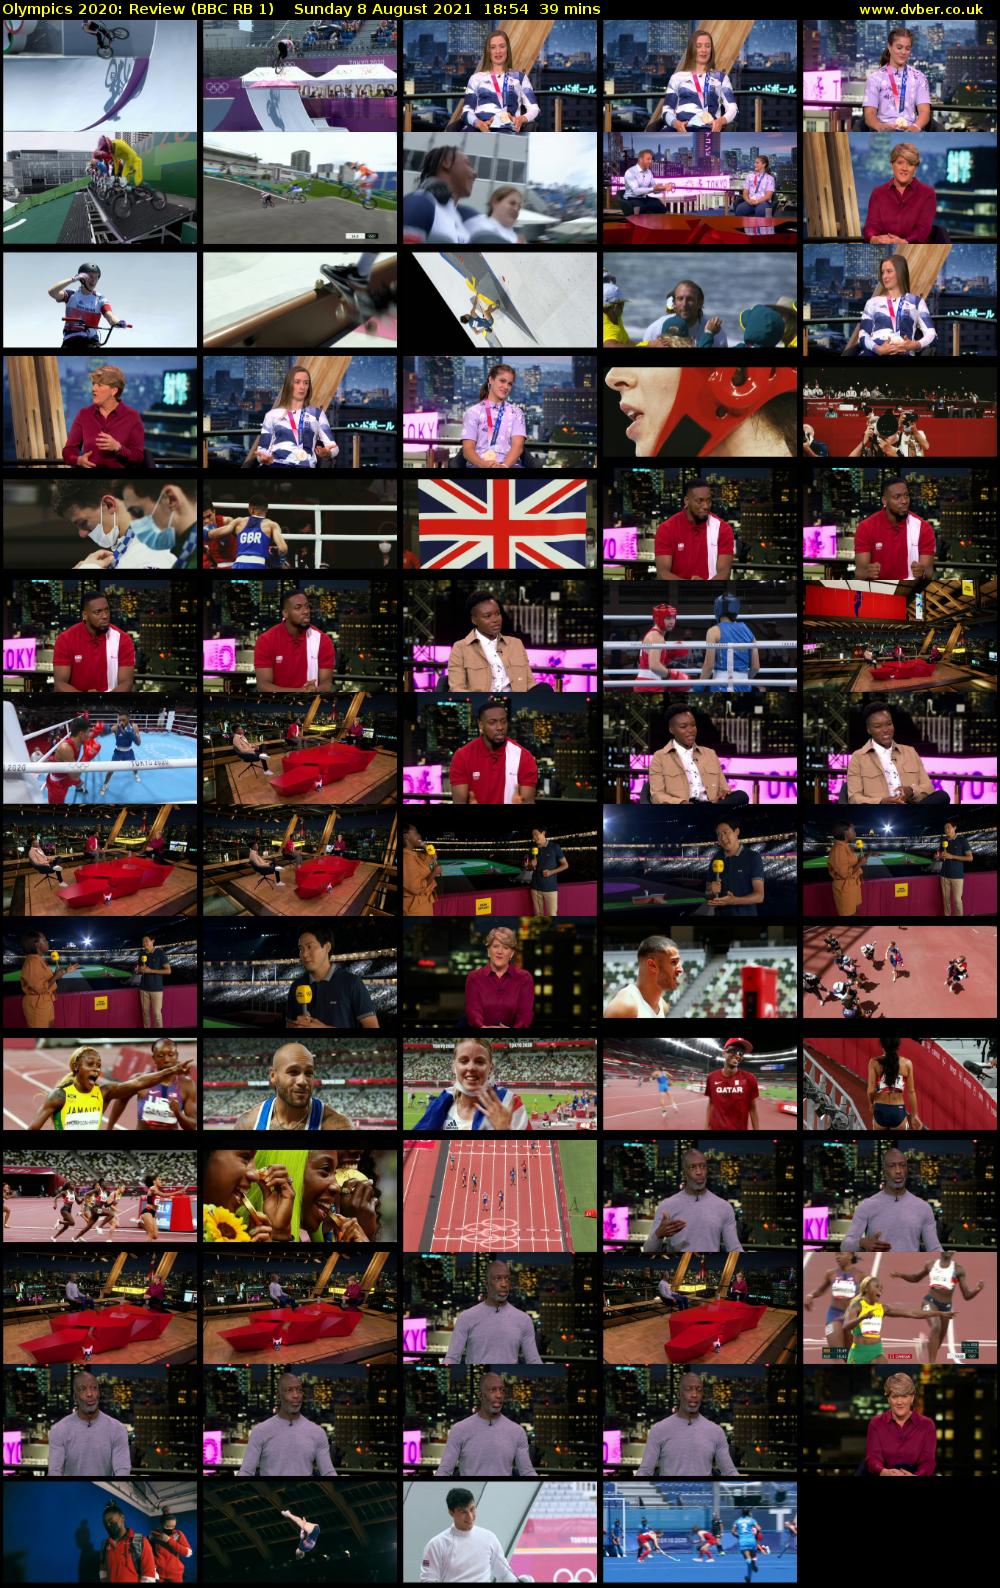 Olympics 2020: Review (BBC RB 1) Sunday 8 August 2021 18:54 - 19:33